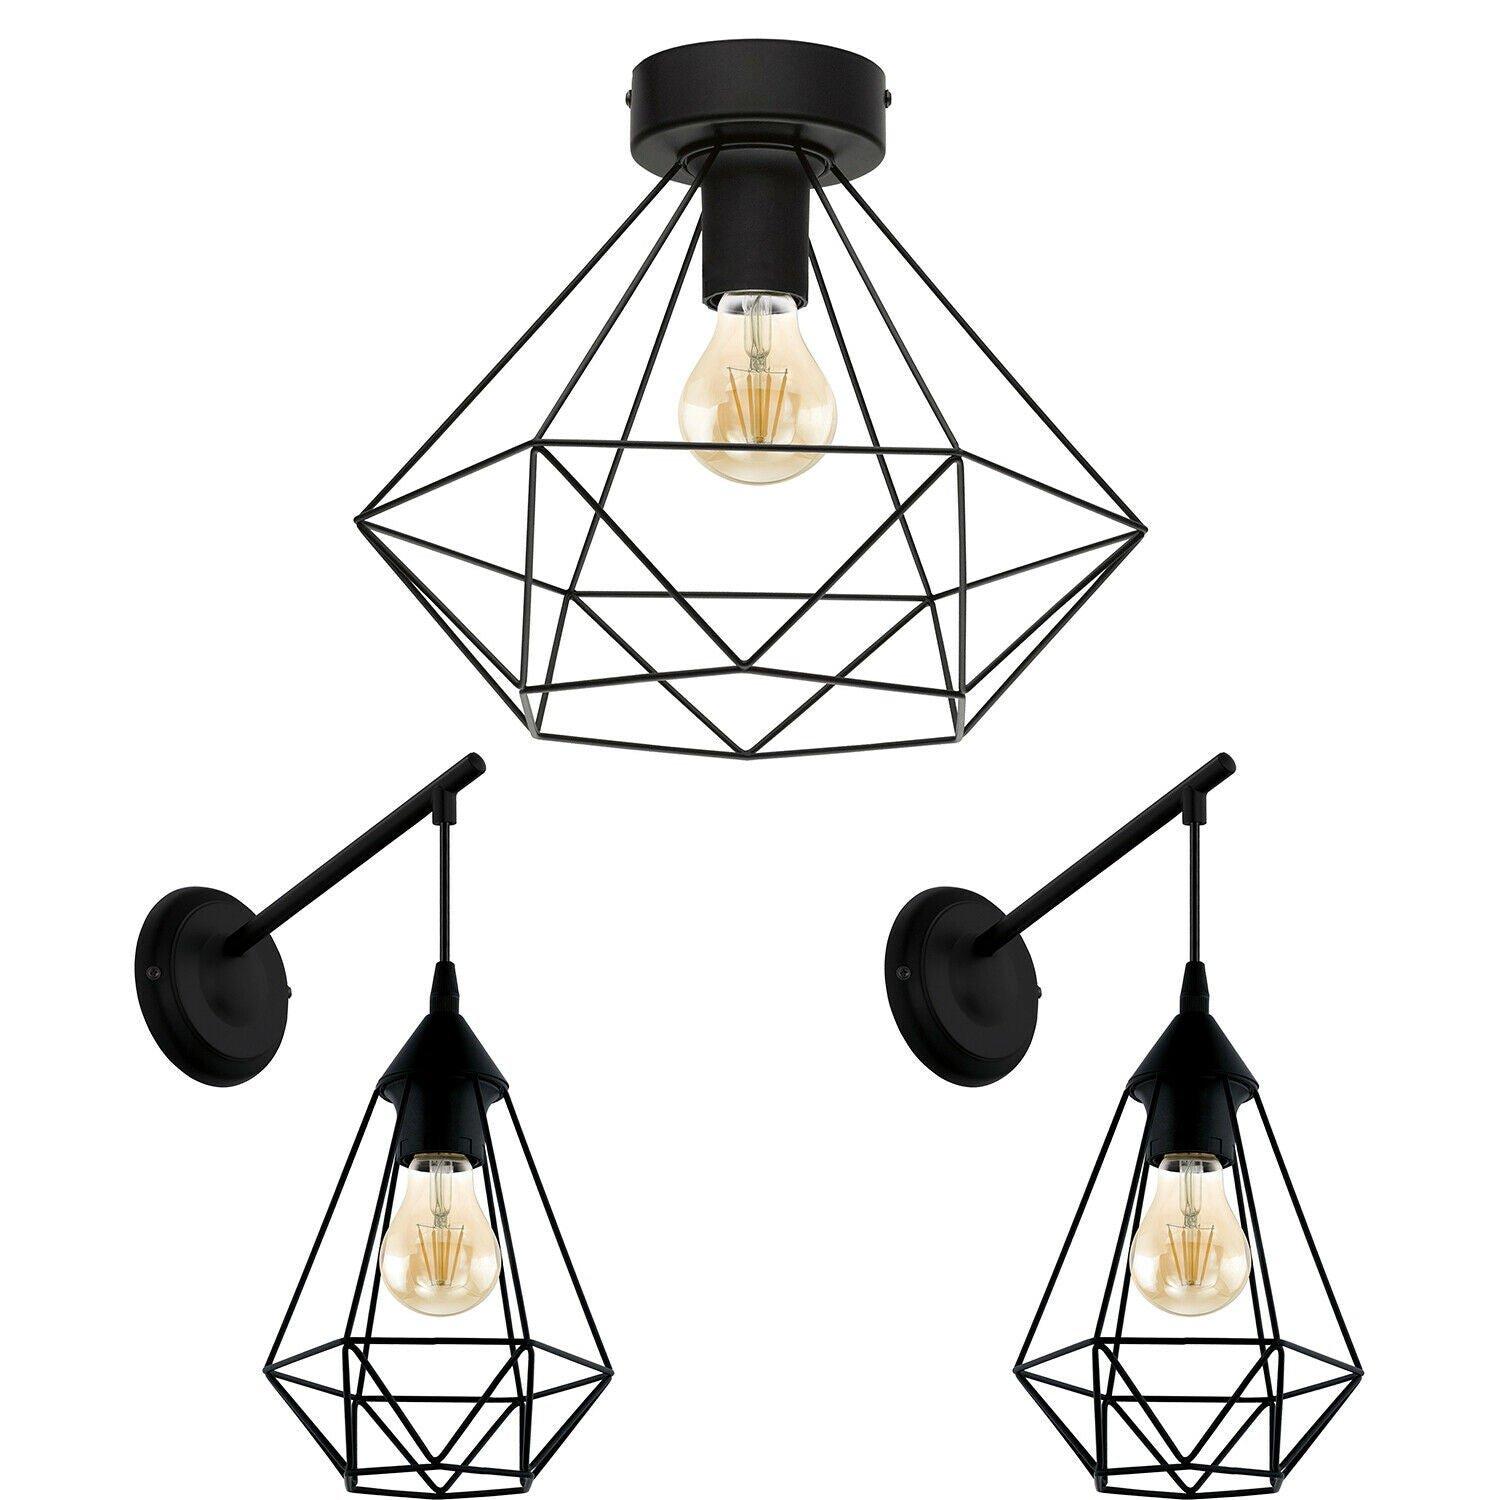 Low Ceiling Light & 2x Matching Wall Lights Black Geometric Wire Cage Shade